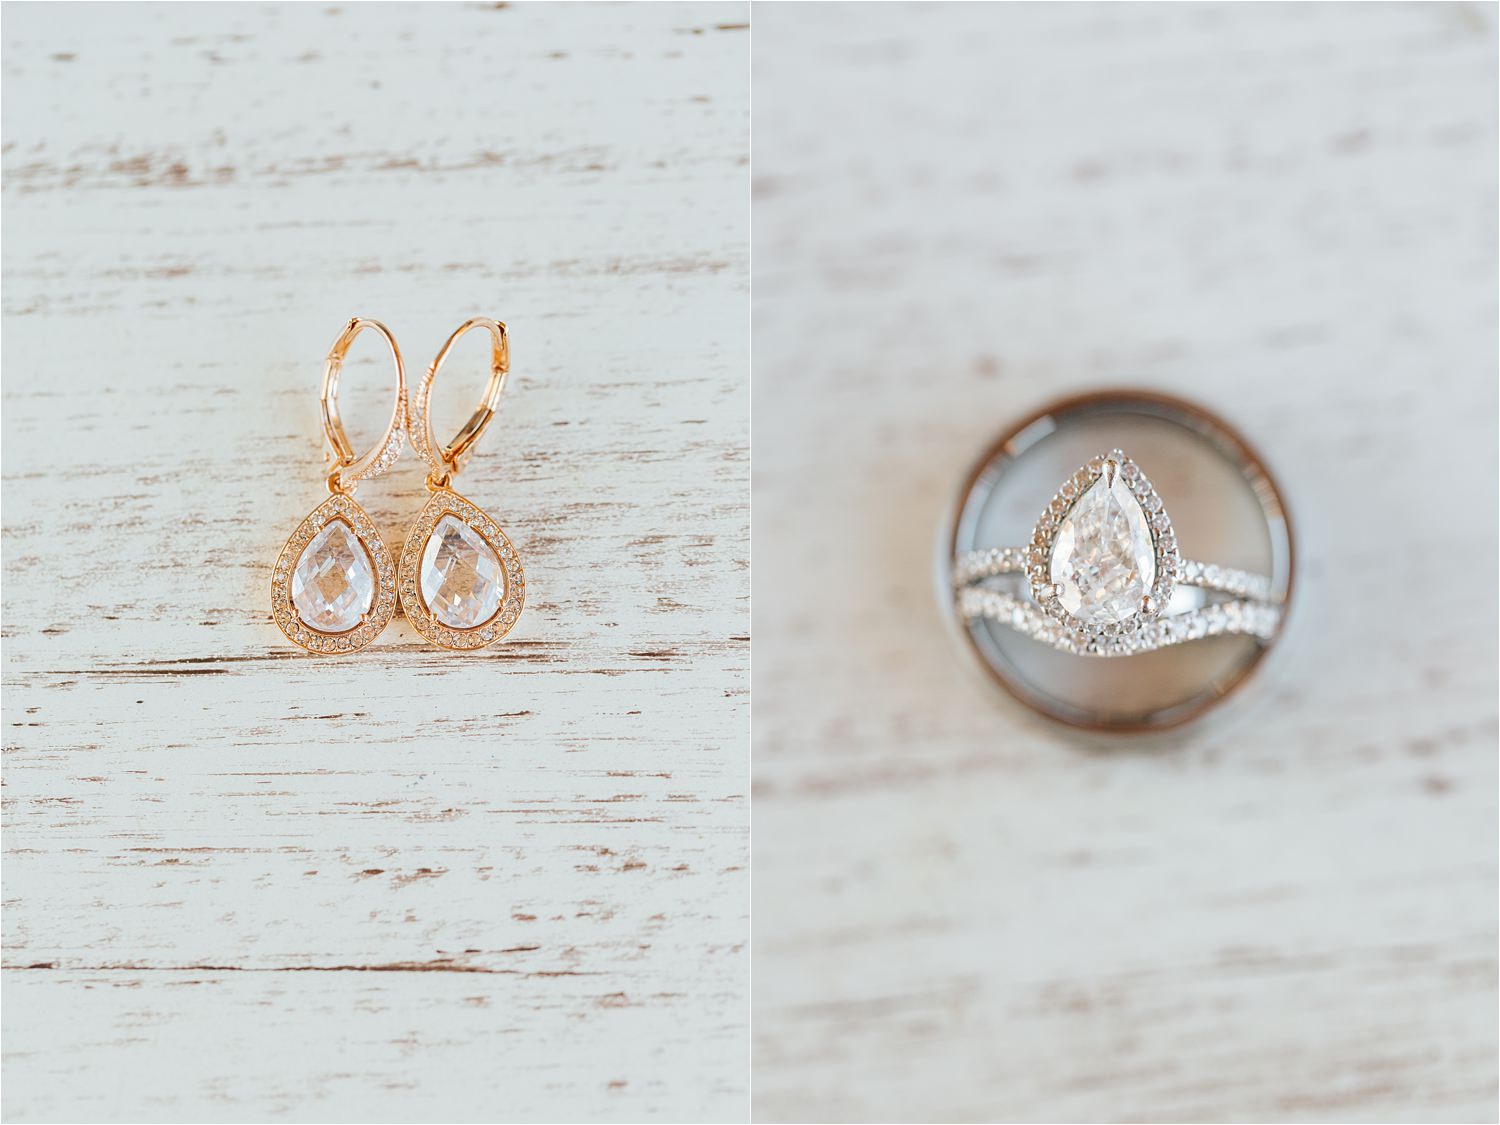 Bride's Wedding Day Jewelry and Wedding Ring - Engagement Ring - https://brittneyhannonphotography.com